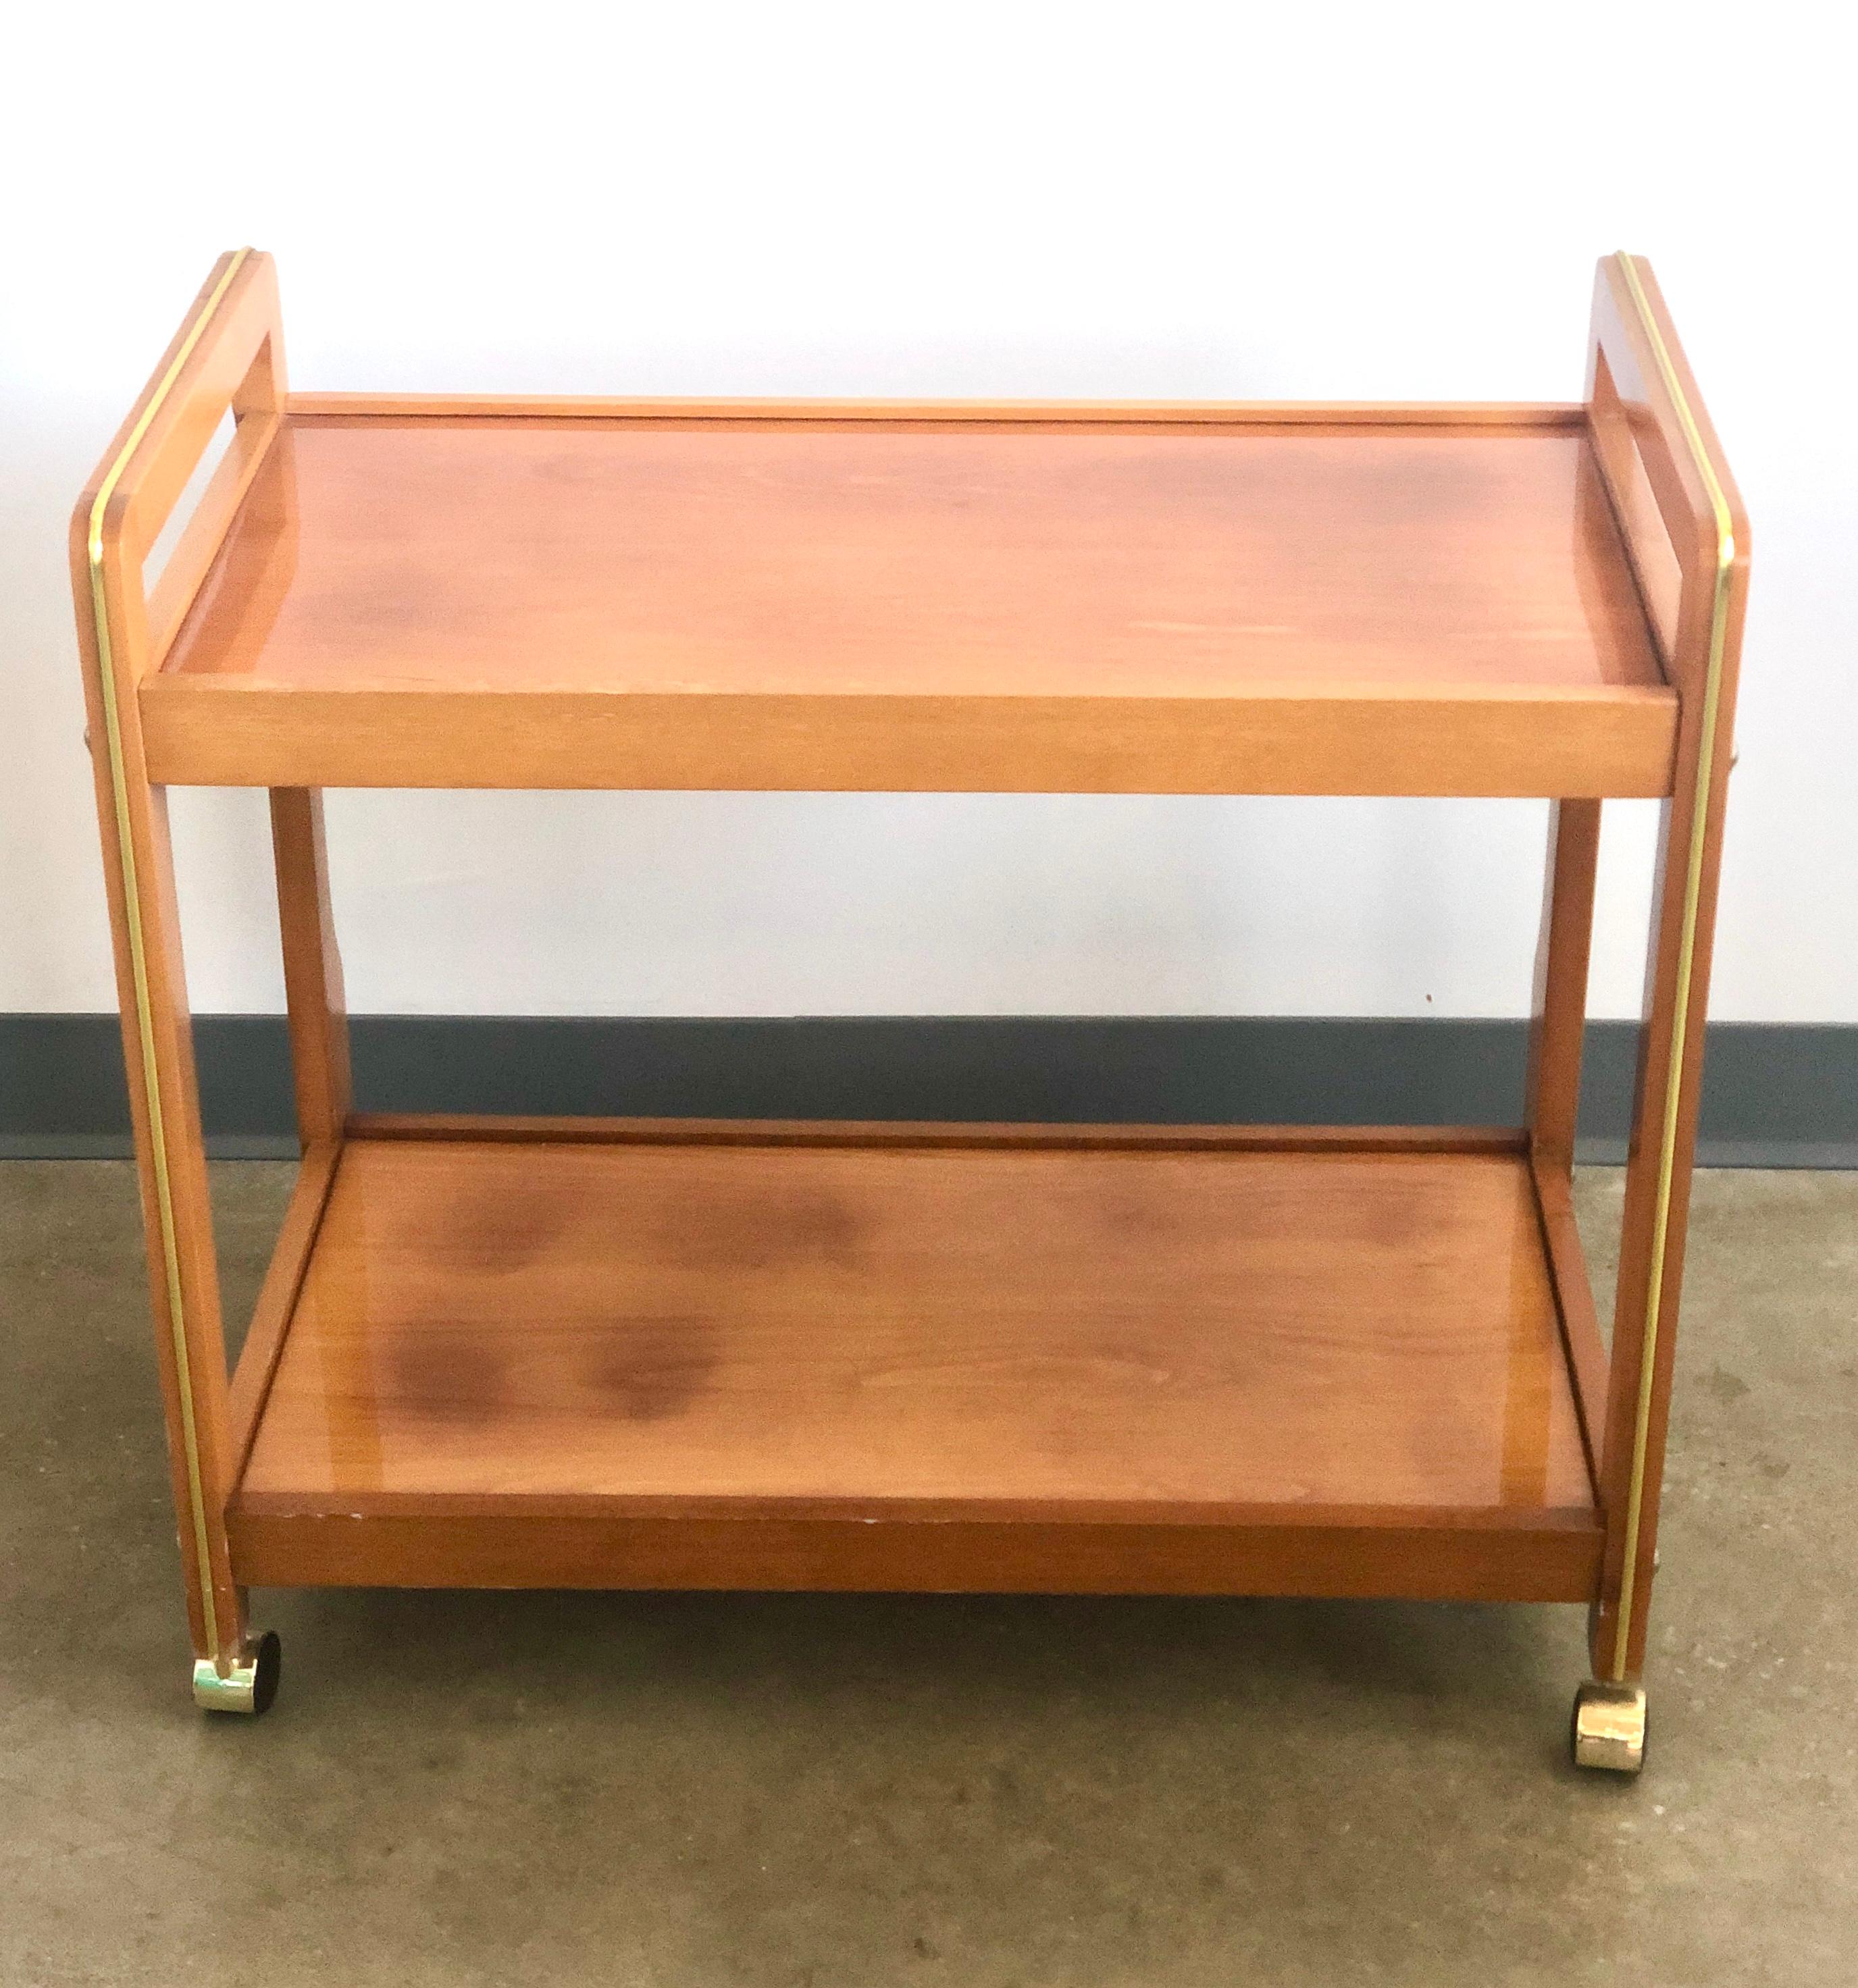 Mid-Century Modern Teak with Inlaid Brass Accents 2-Tier Bar Cart Beverage Cart, Tea Cart on Wheels For Sale